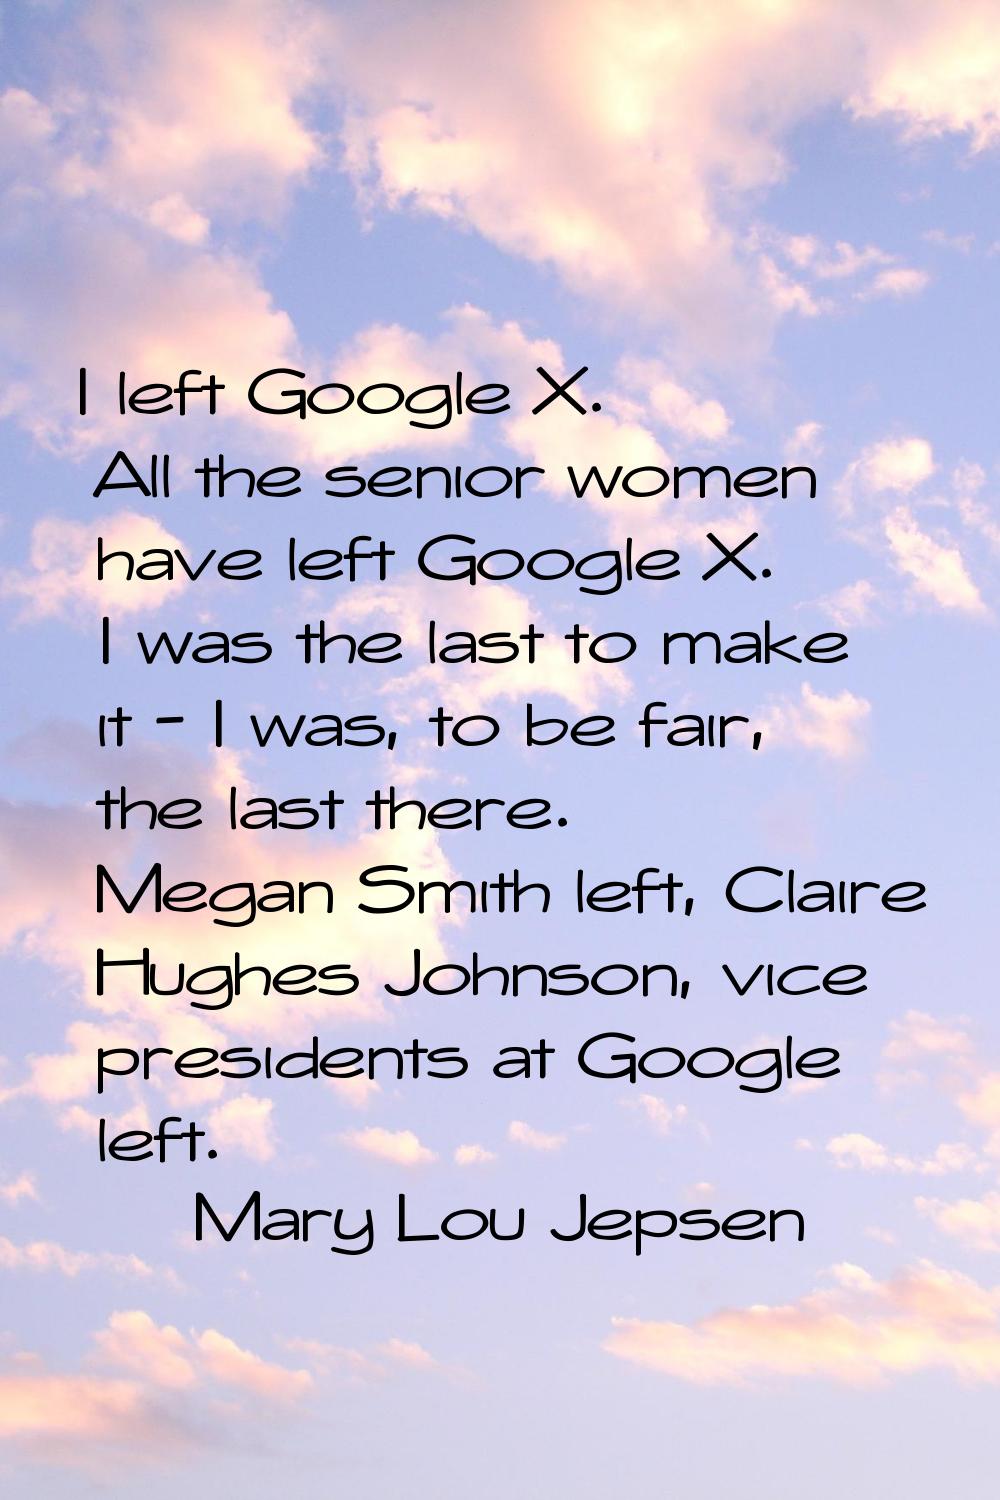 I left Google X. All the senior women have left Google X. I was the last to make it - I was, to be 